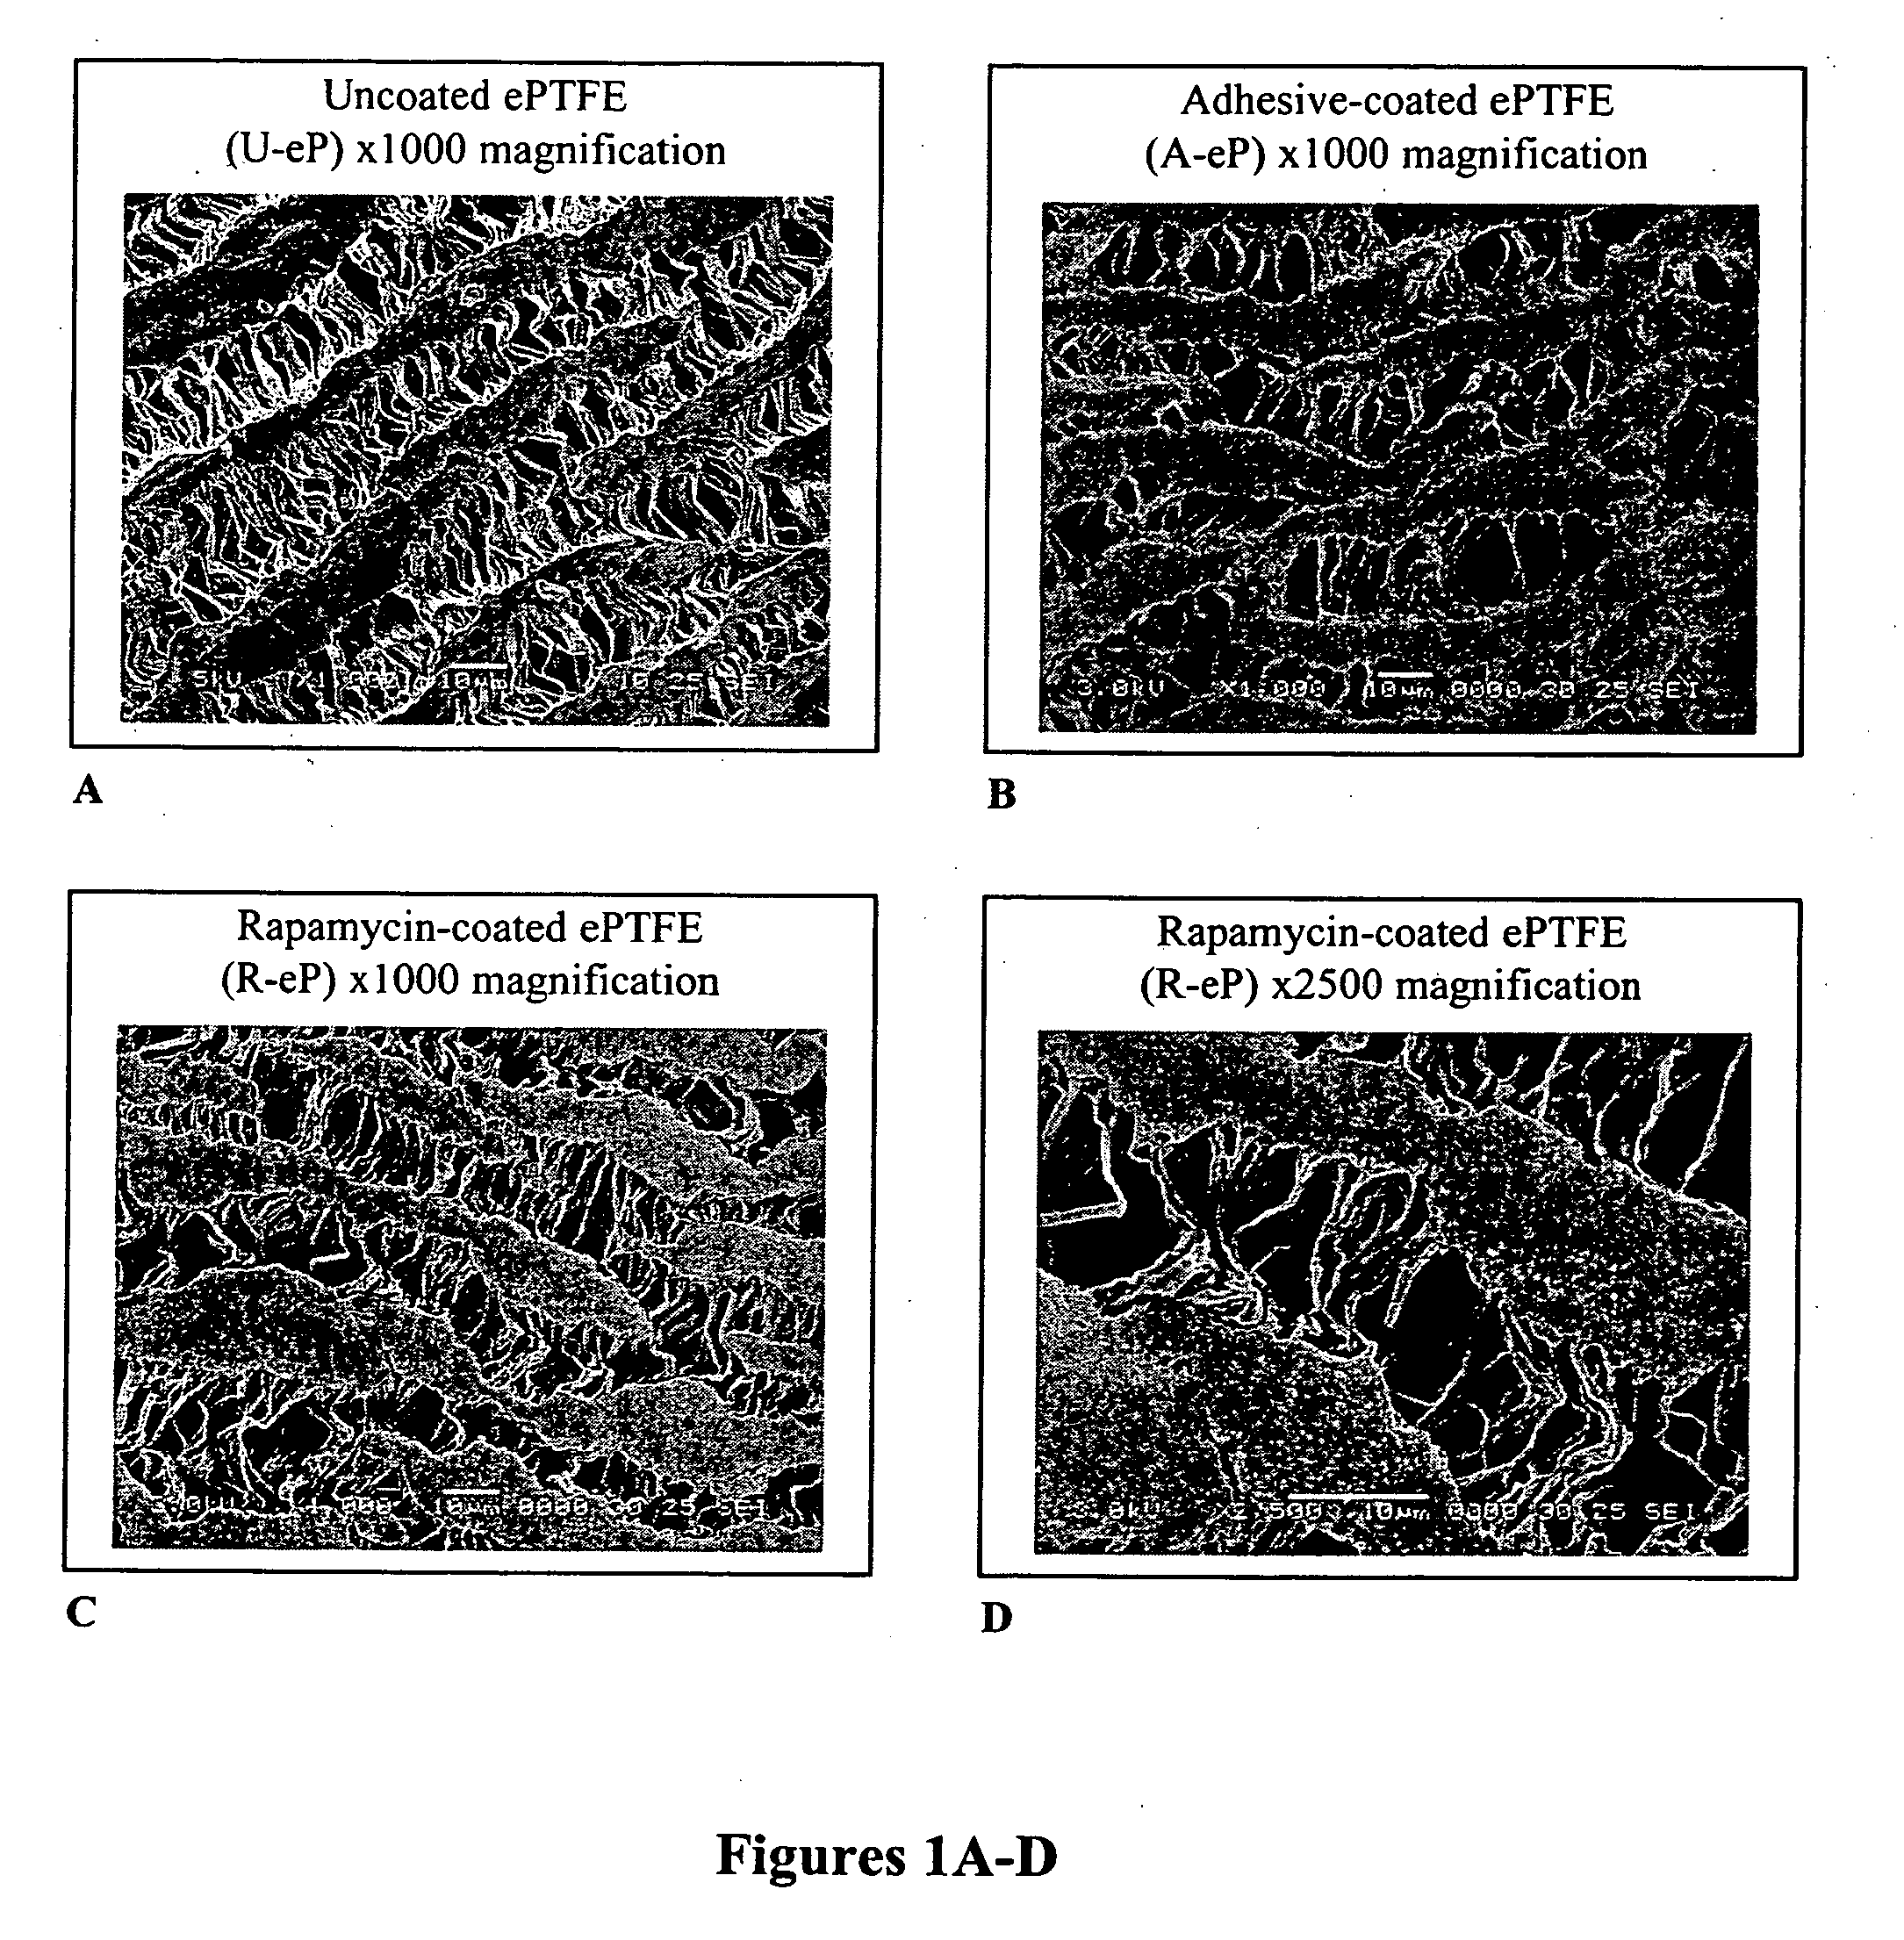 Adhesive composition for carrying therapeutic agents as delivery vehicle on coatings applied to vascular grafts